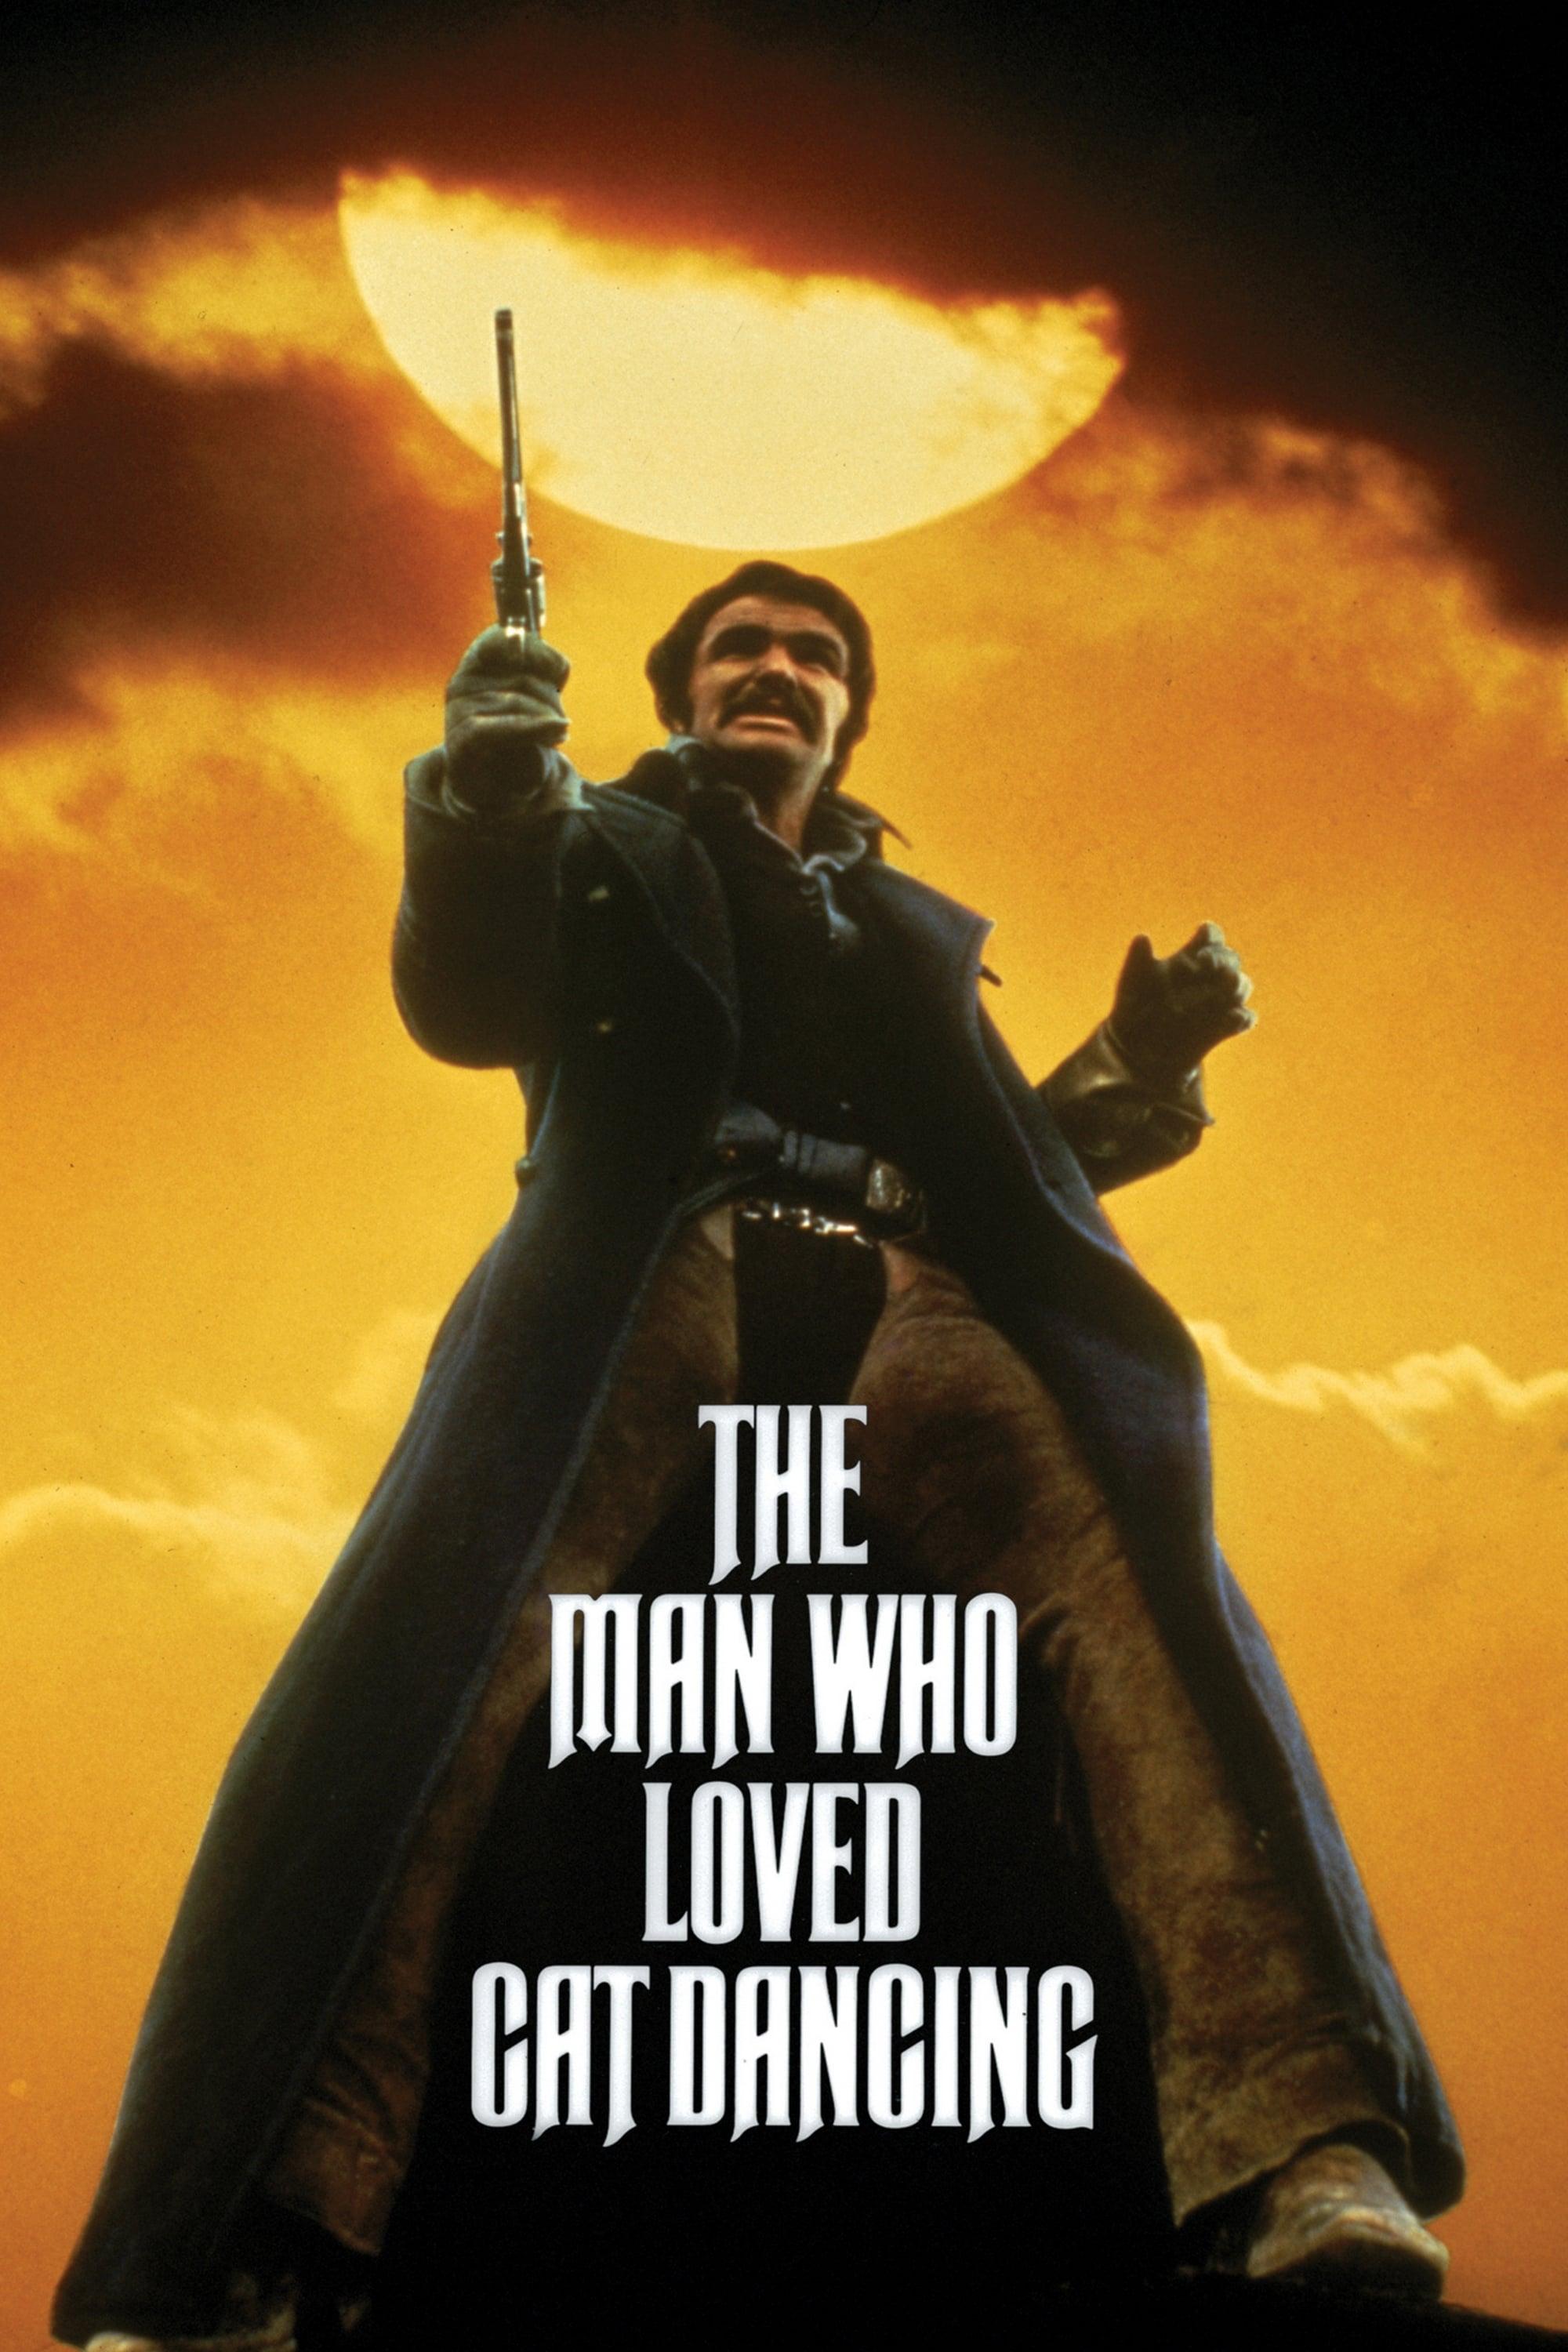 The Man Who Loved Cat Dancing poster